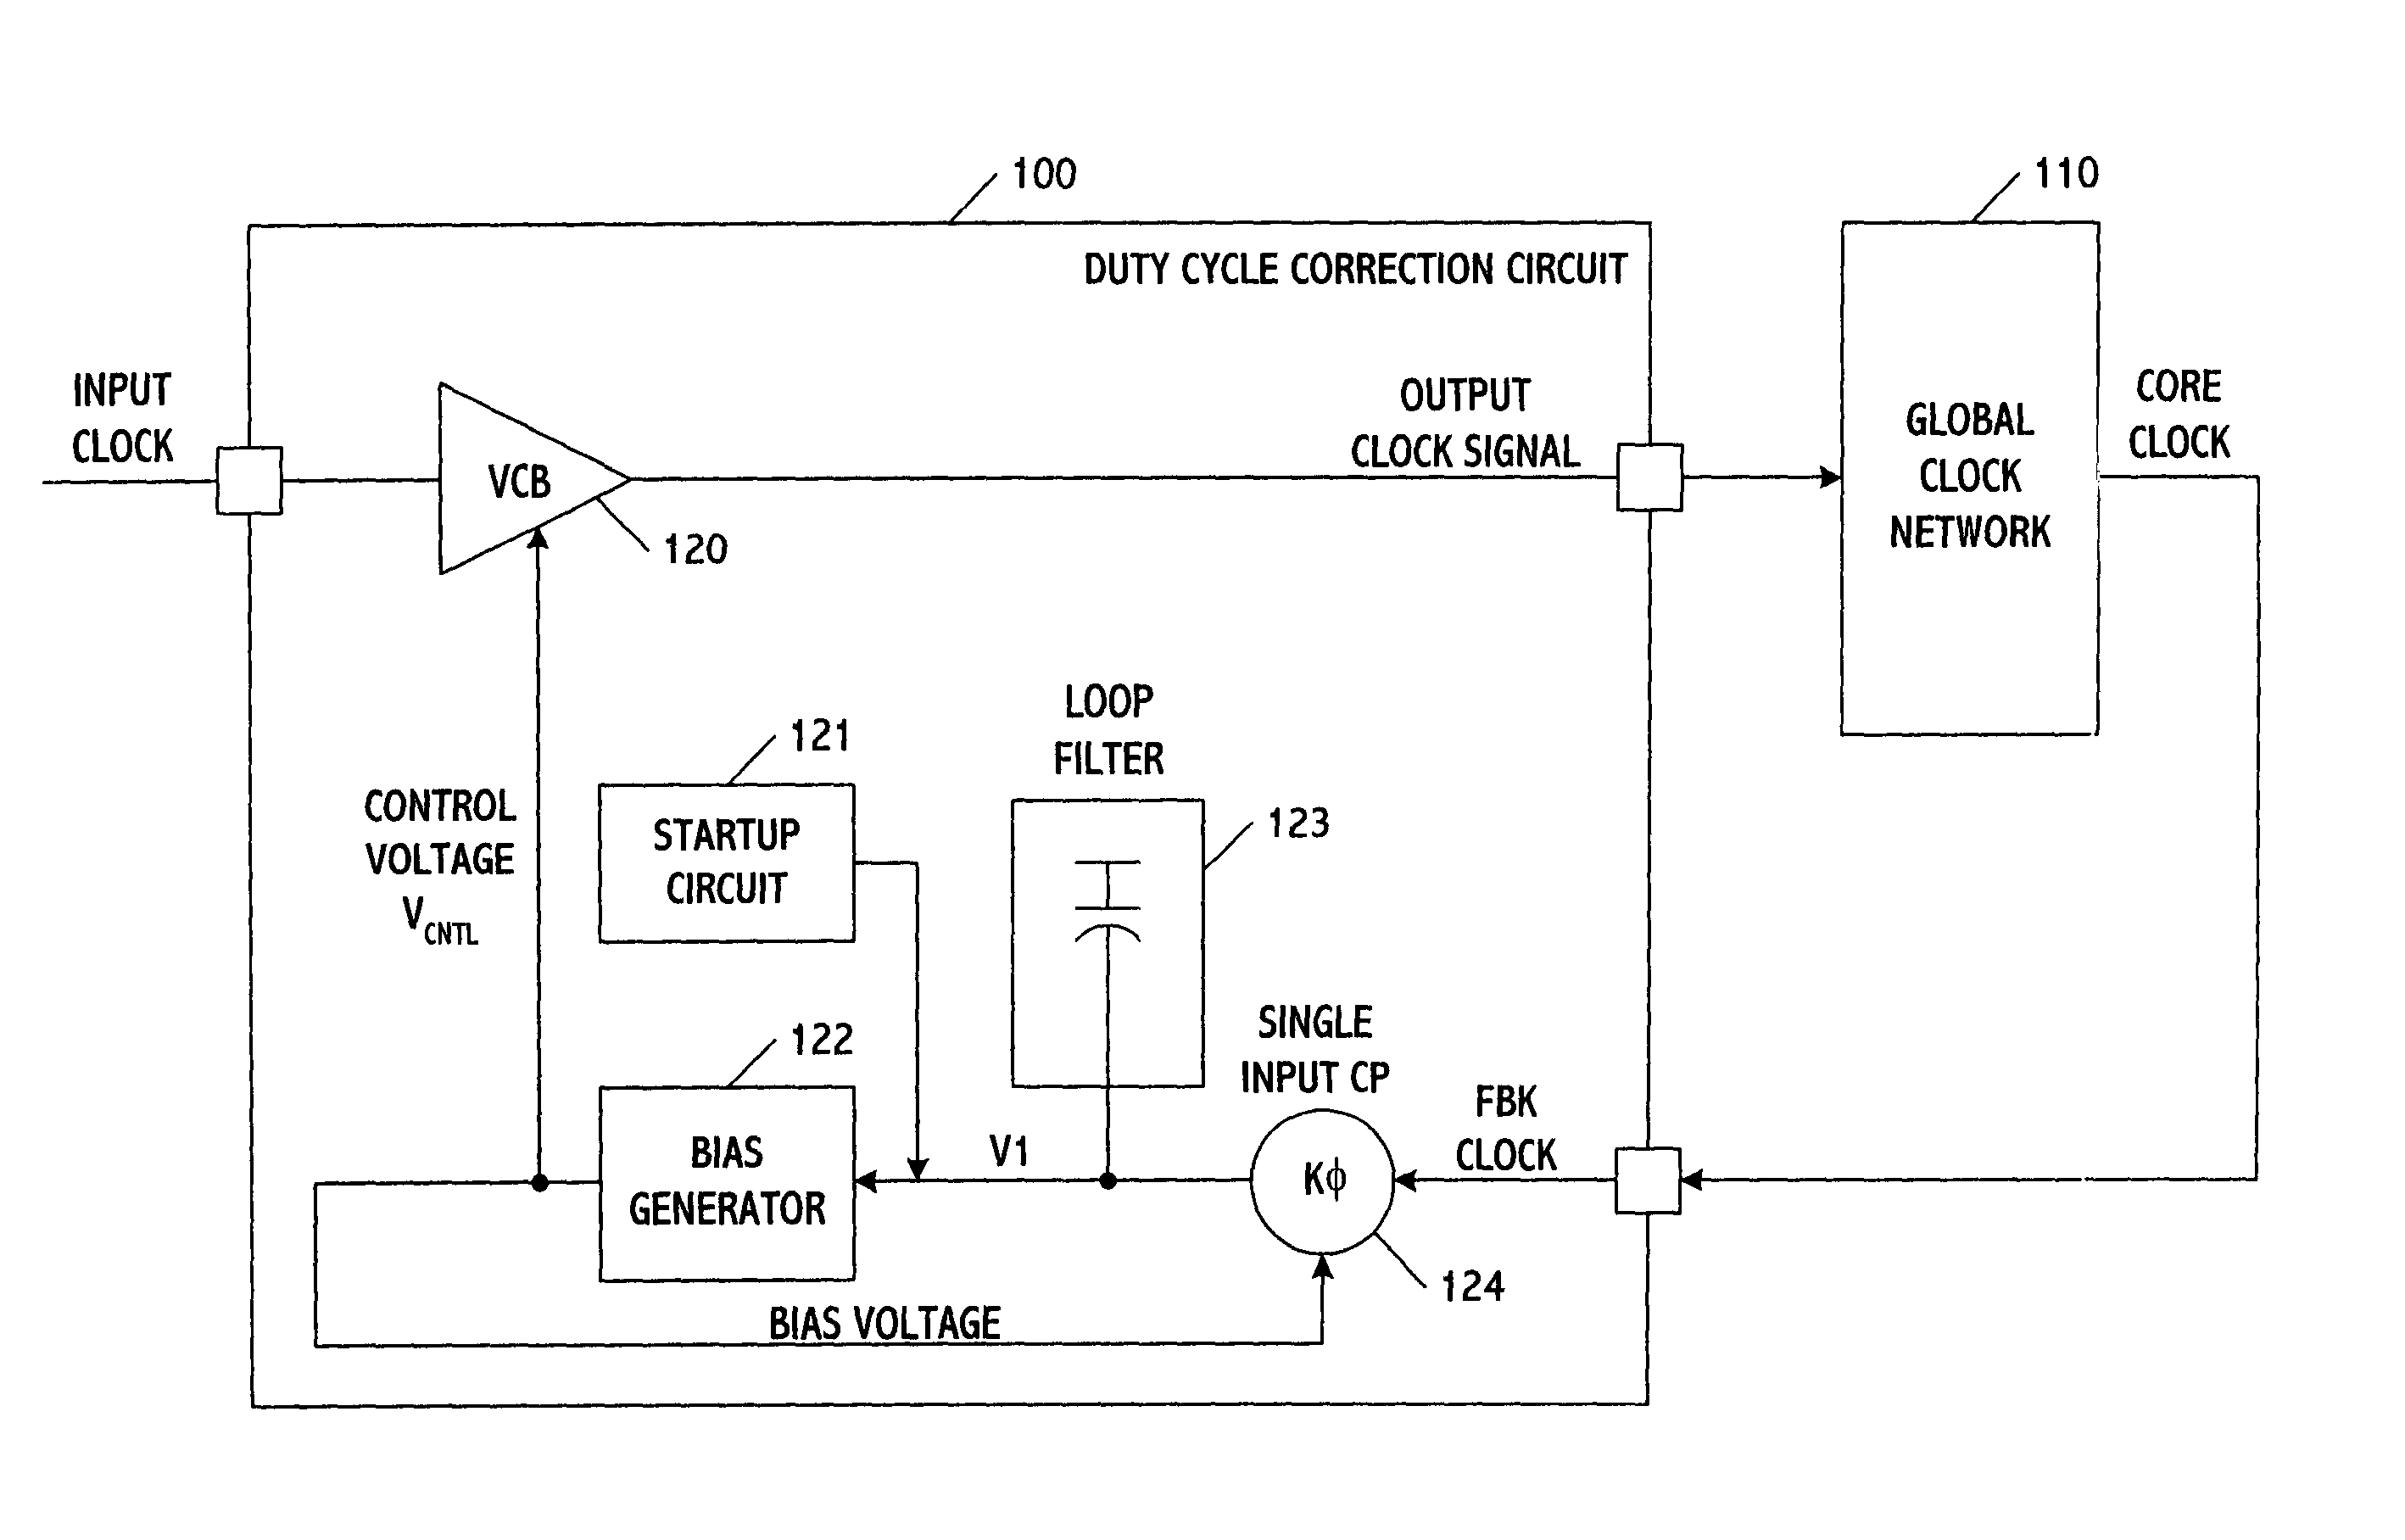 High-accuracy continuous duty-cycle correction circuit